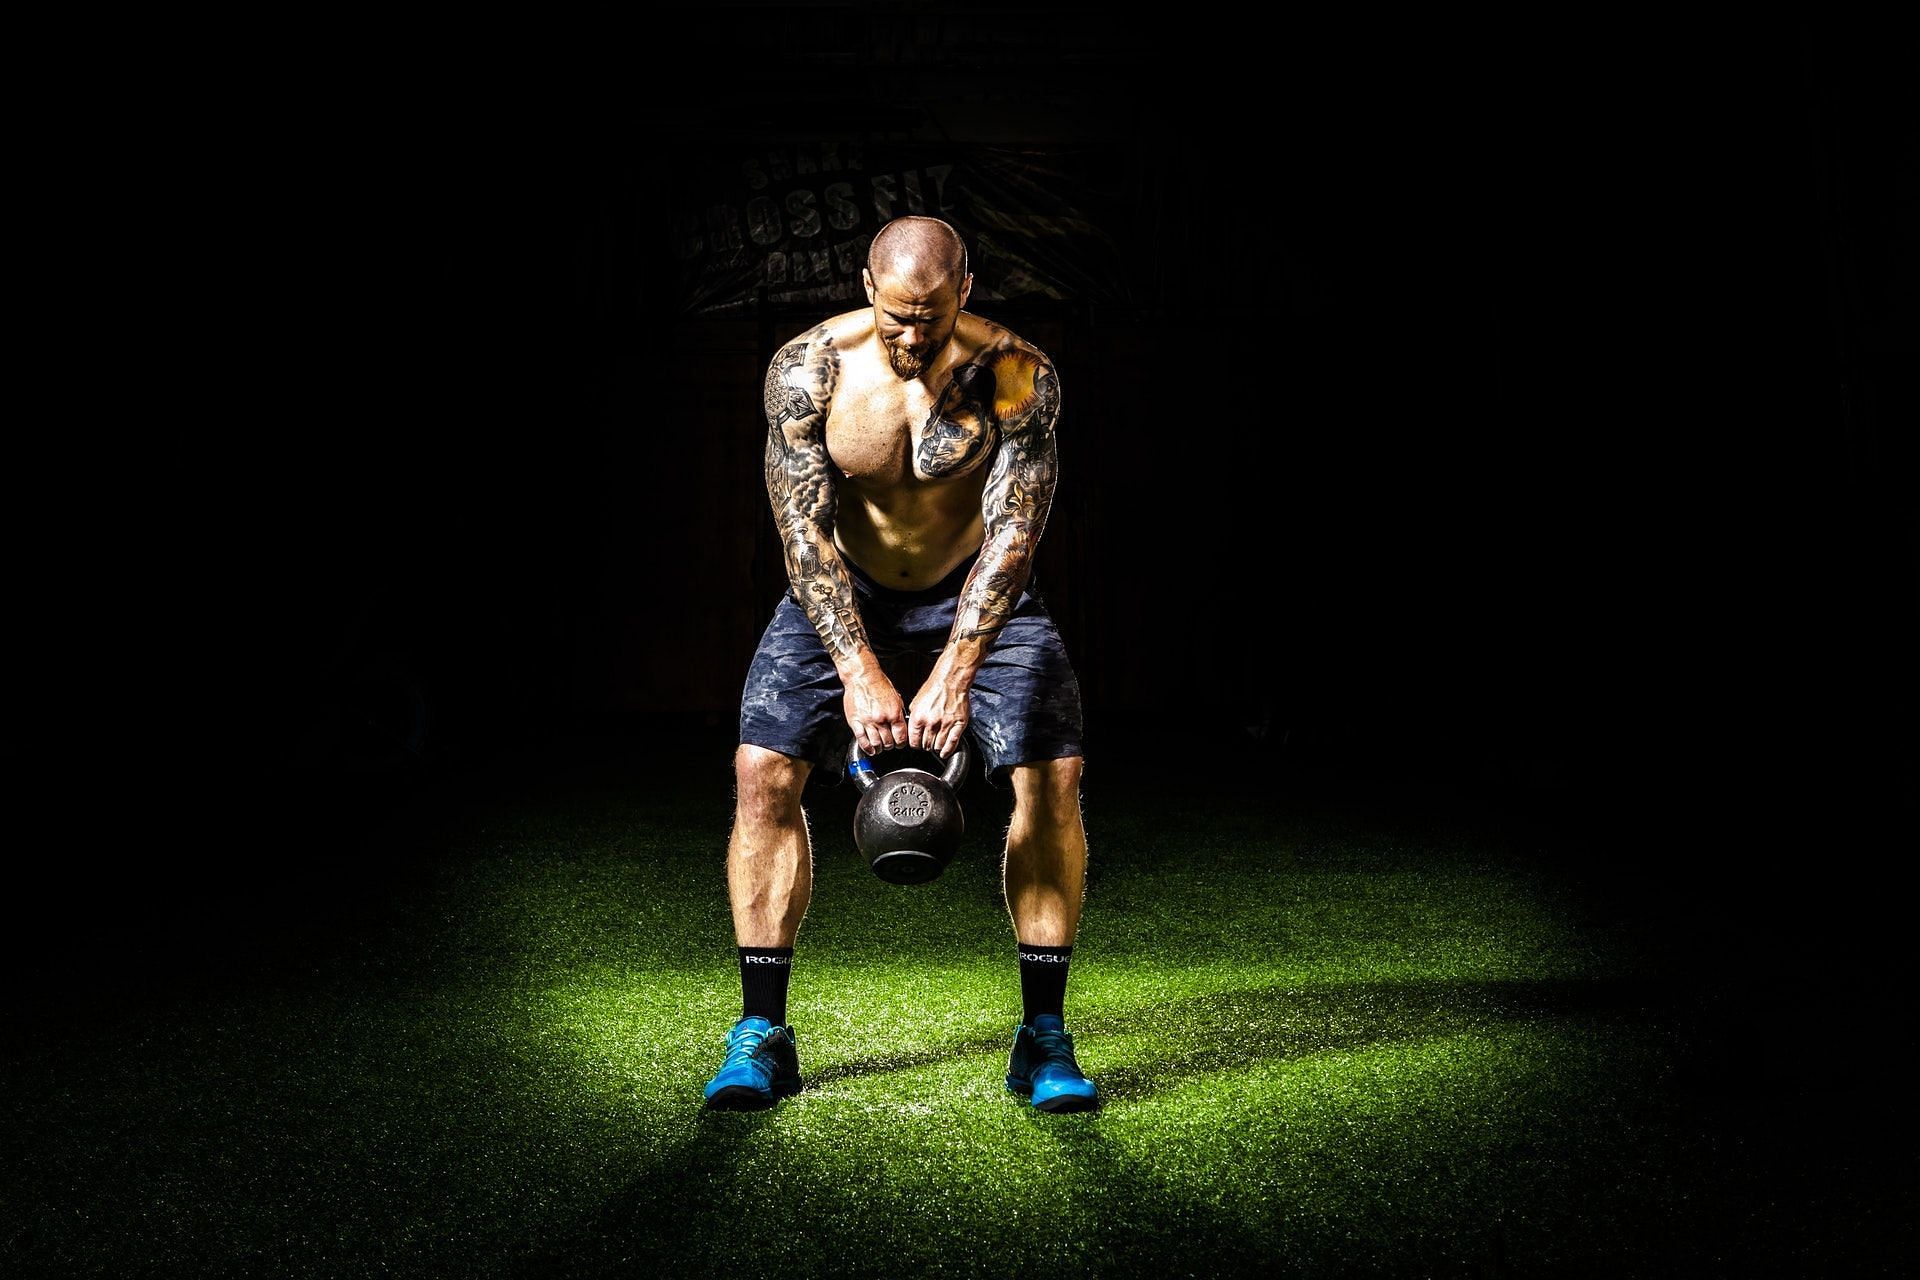 Guide for the best kettlebell exercises. (Image via Pexels/Photo by Binyamin Mellish)